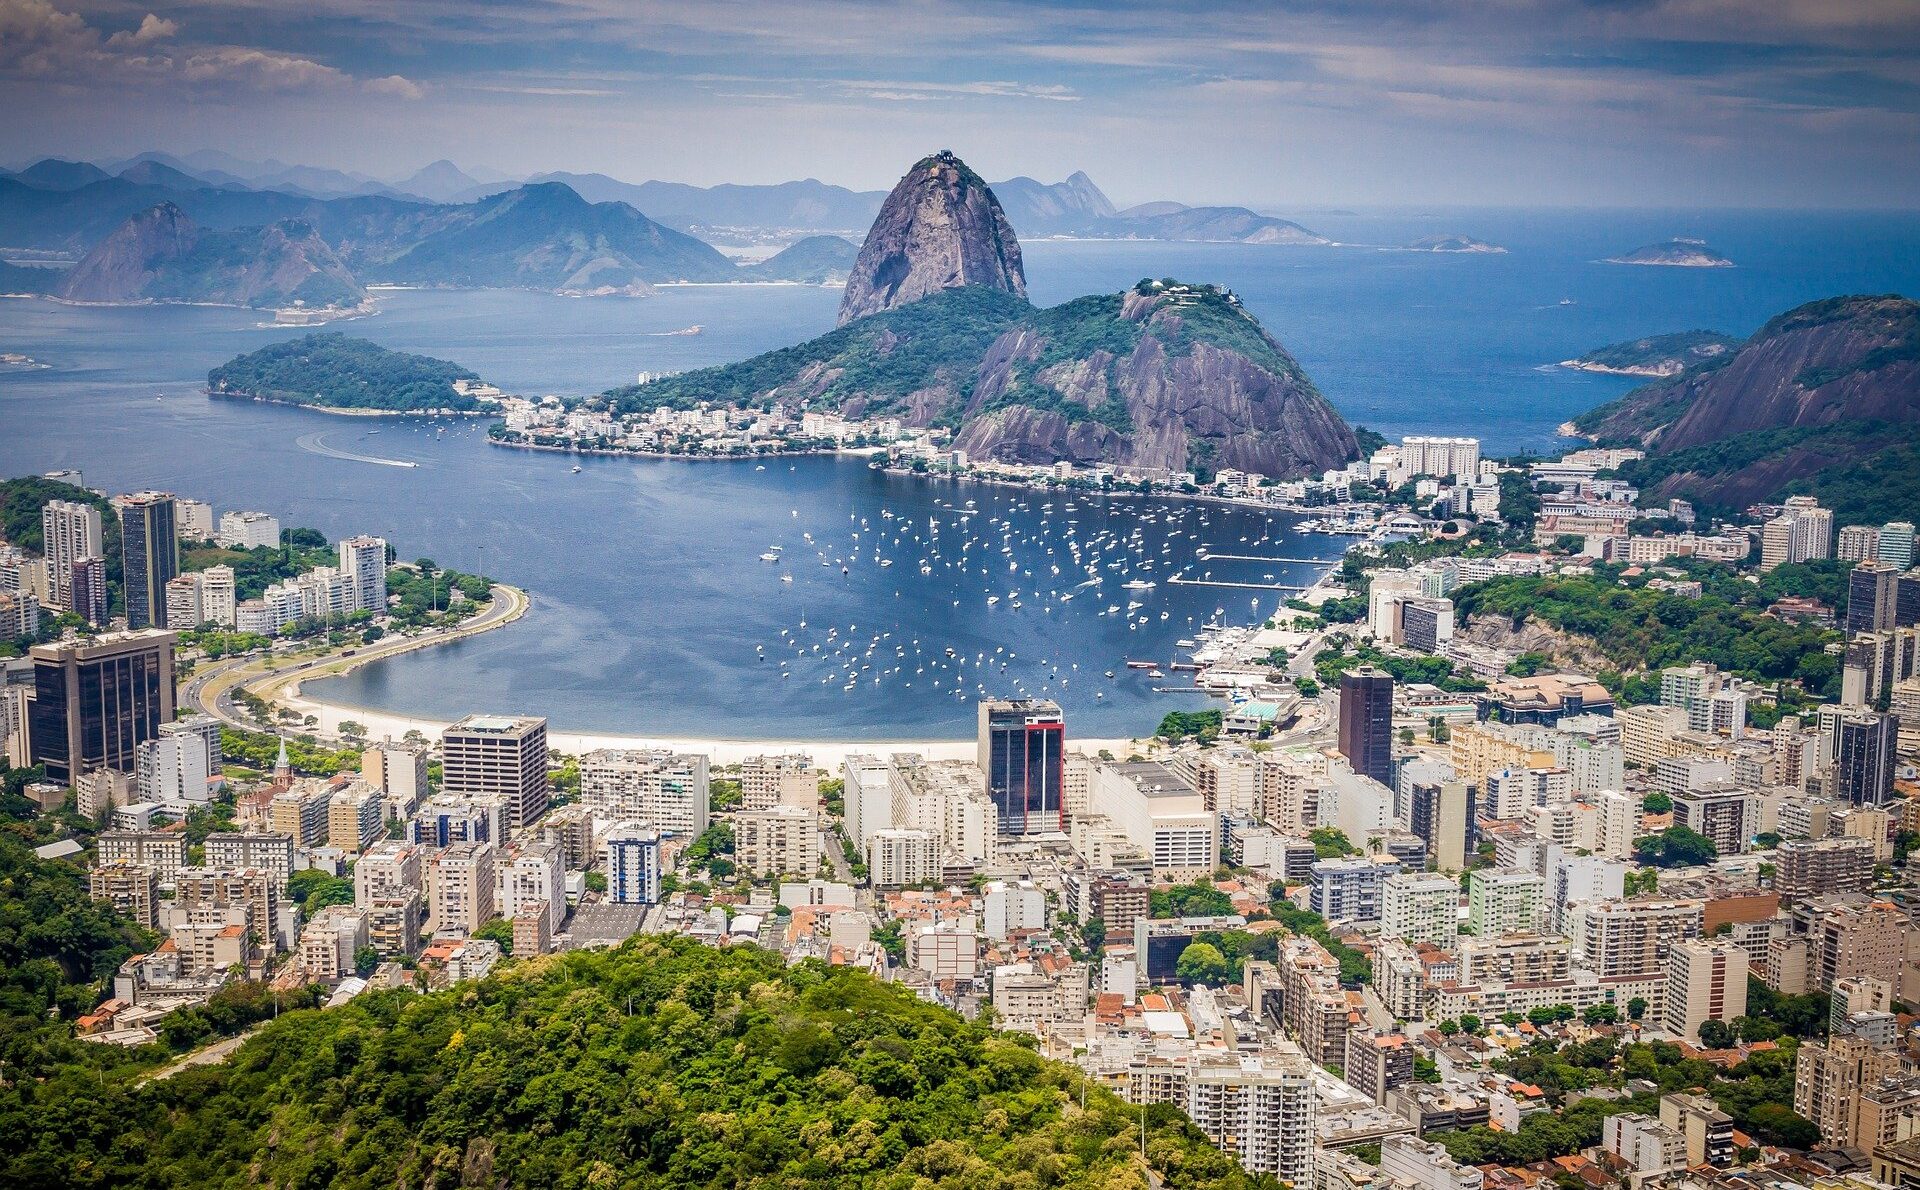 Picture of Rio de Janeiro where you can see Sugar Loaf mountain and Guanabara Bay